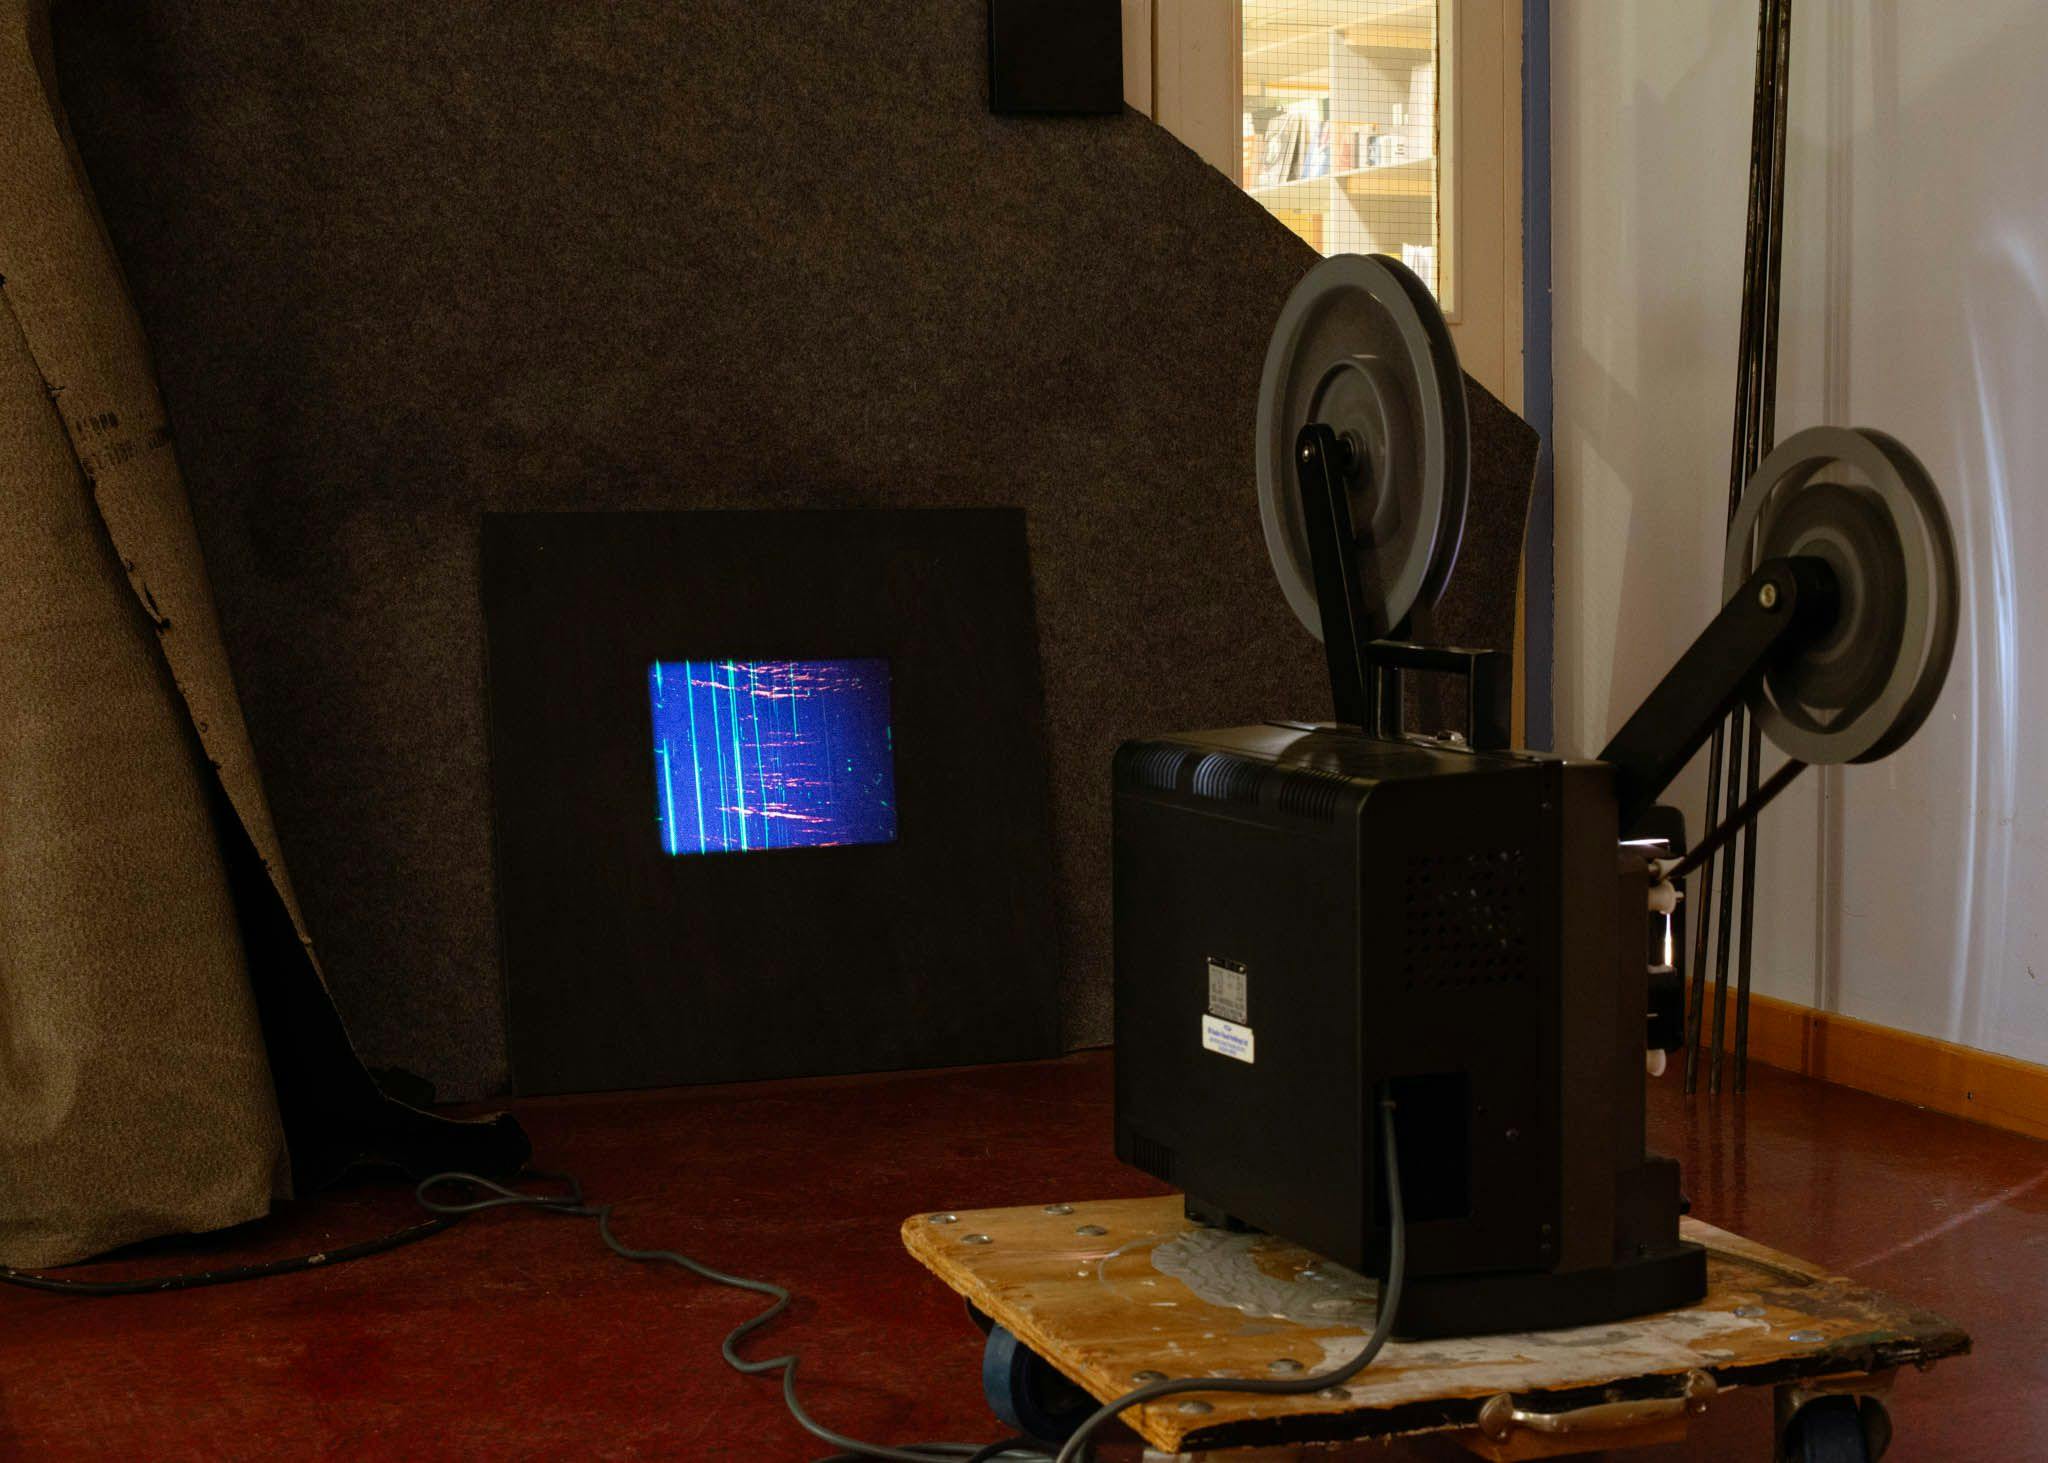 An analogue projector shows a blue image in a dark room.